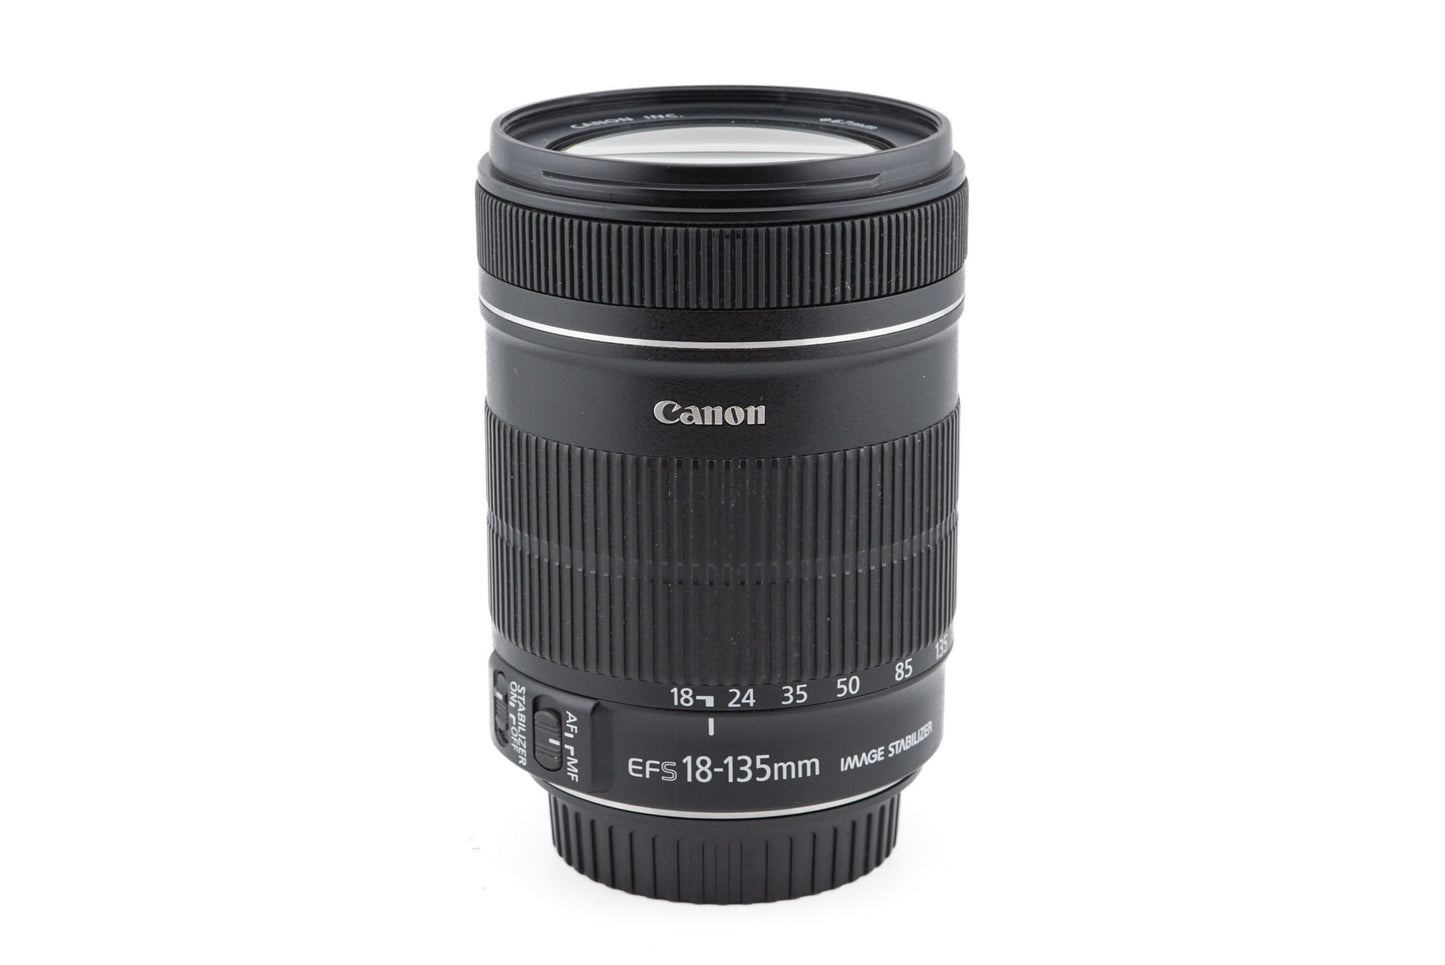 Canon 18-135mm f3.5-5.6 IS - Lens